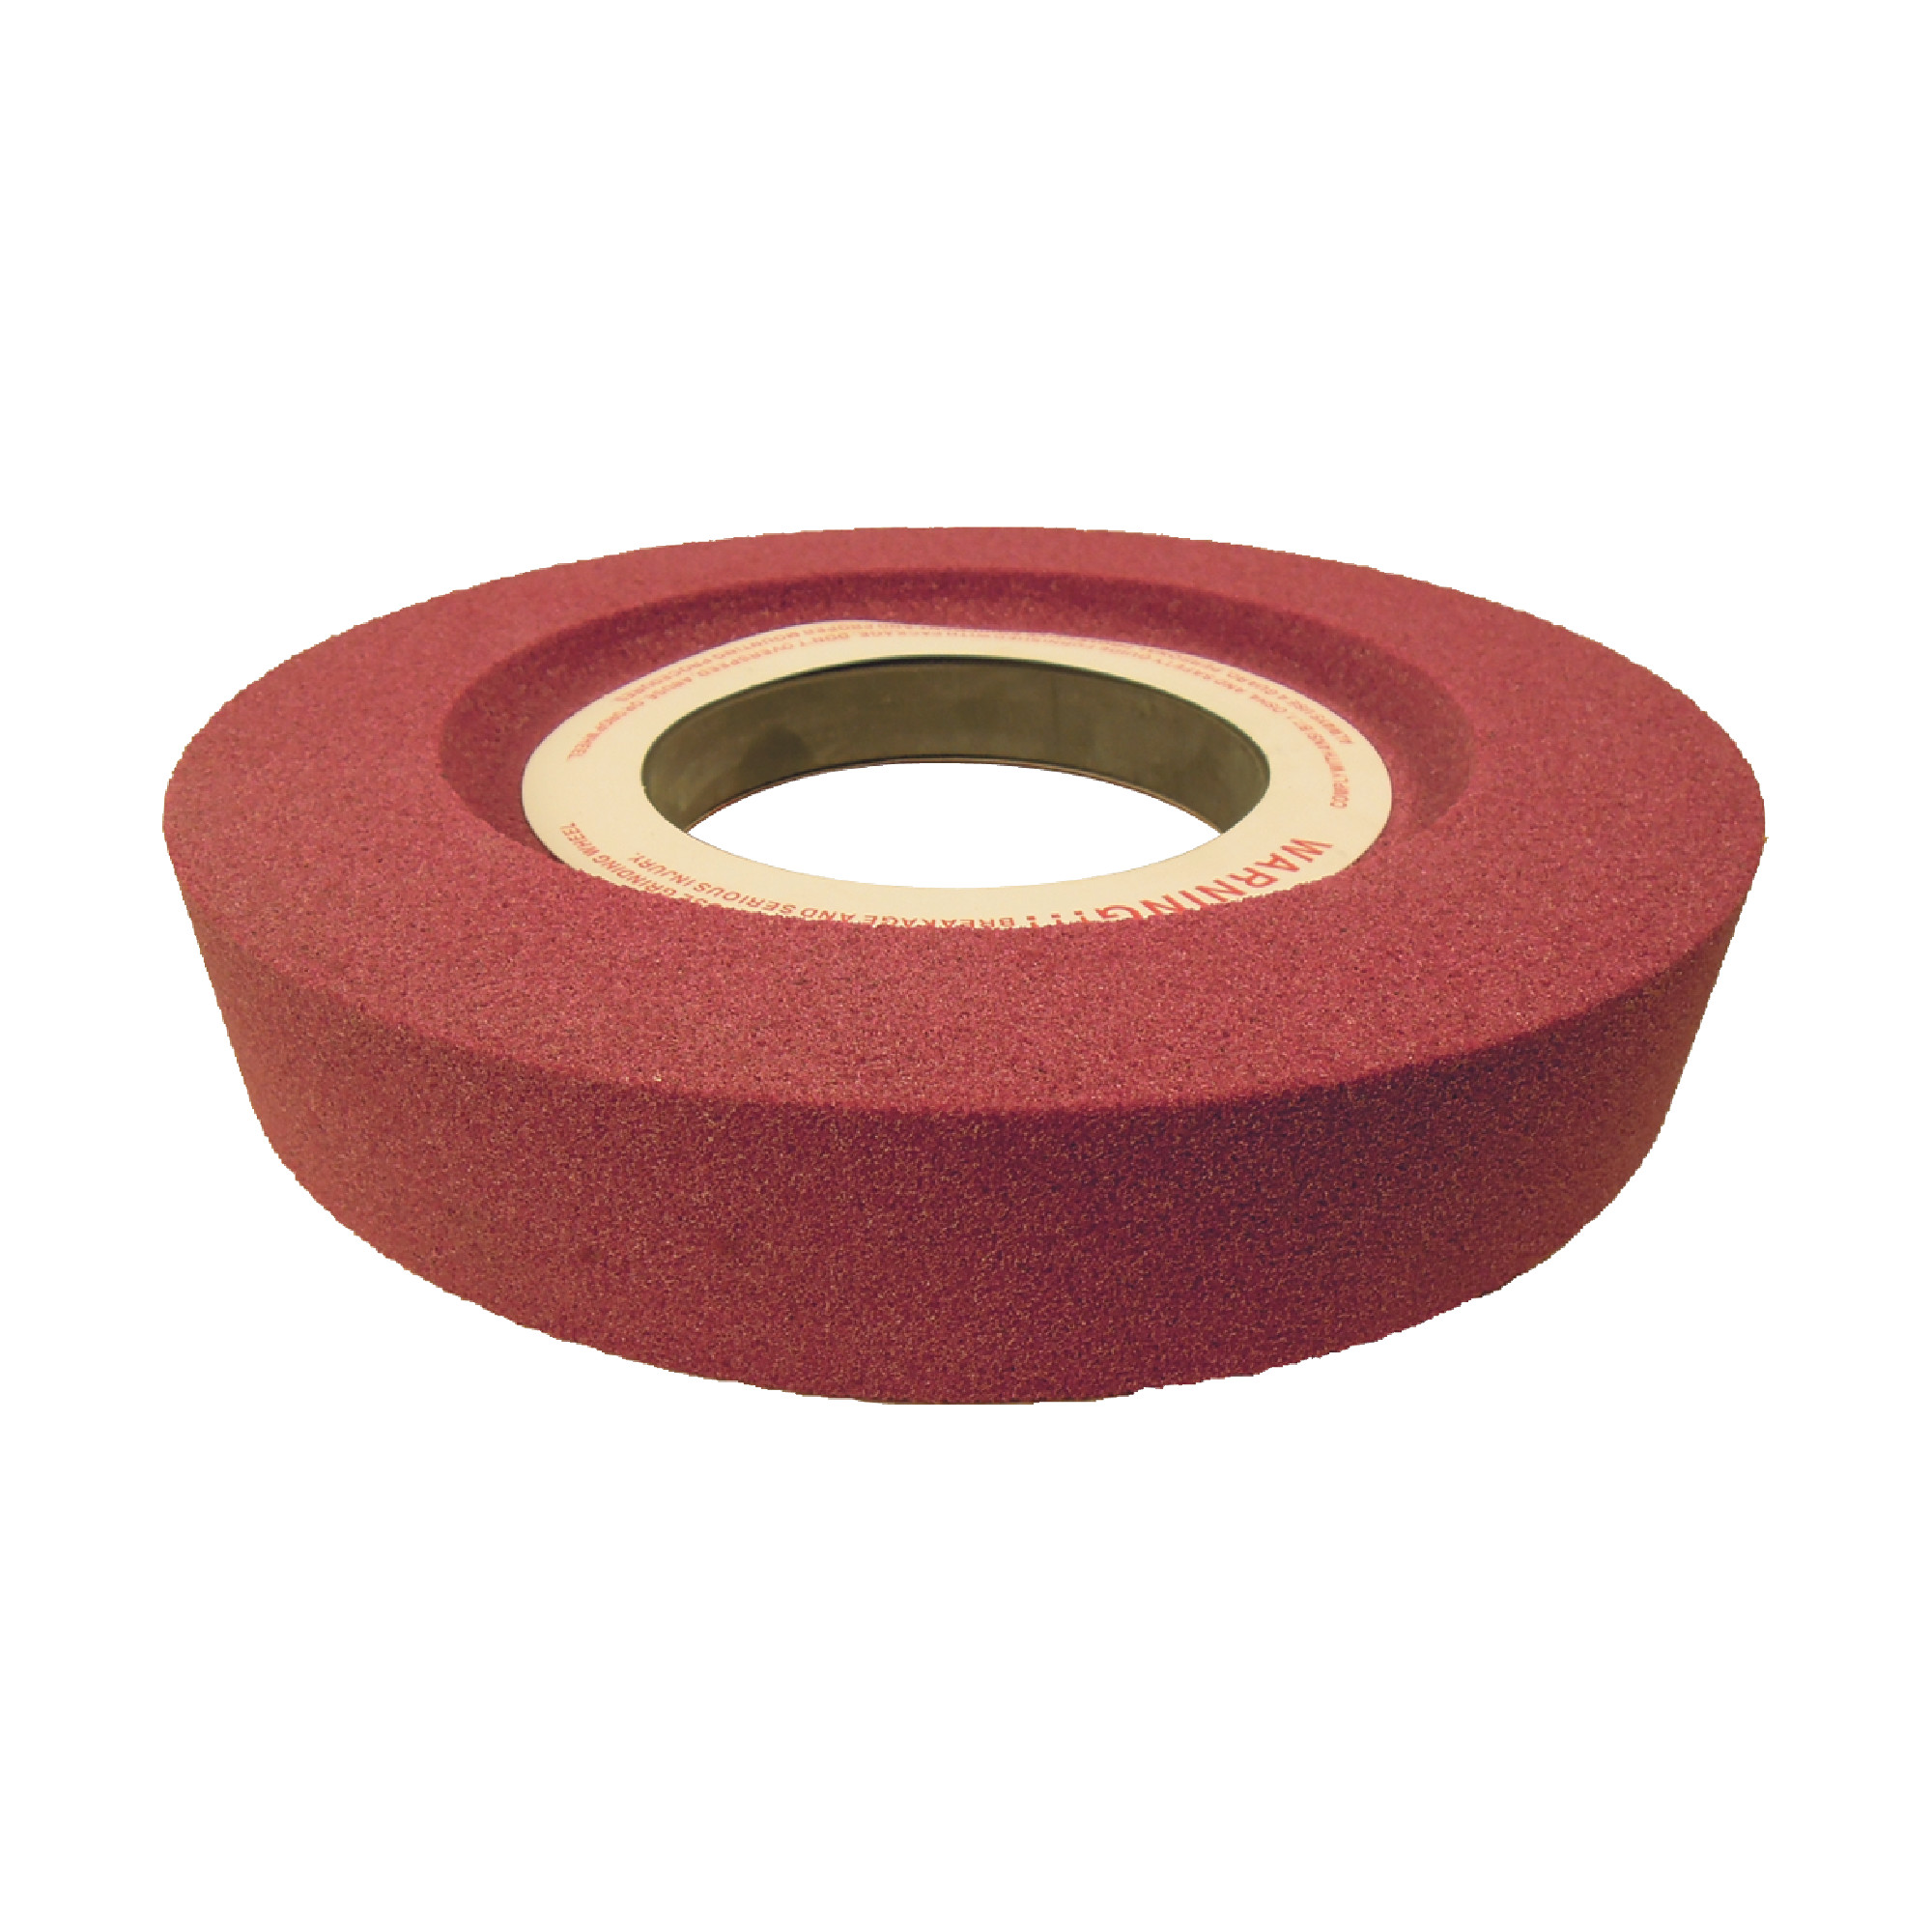 Ruby Surface Grinding Wheel